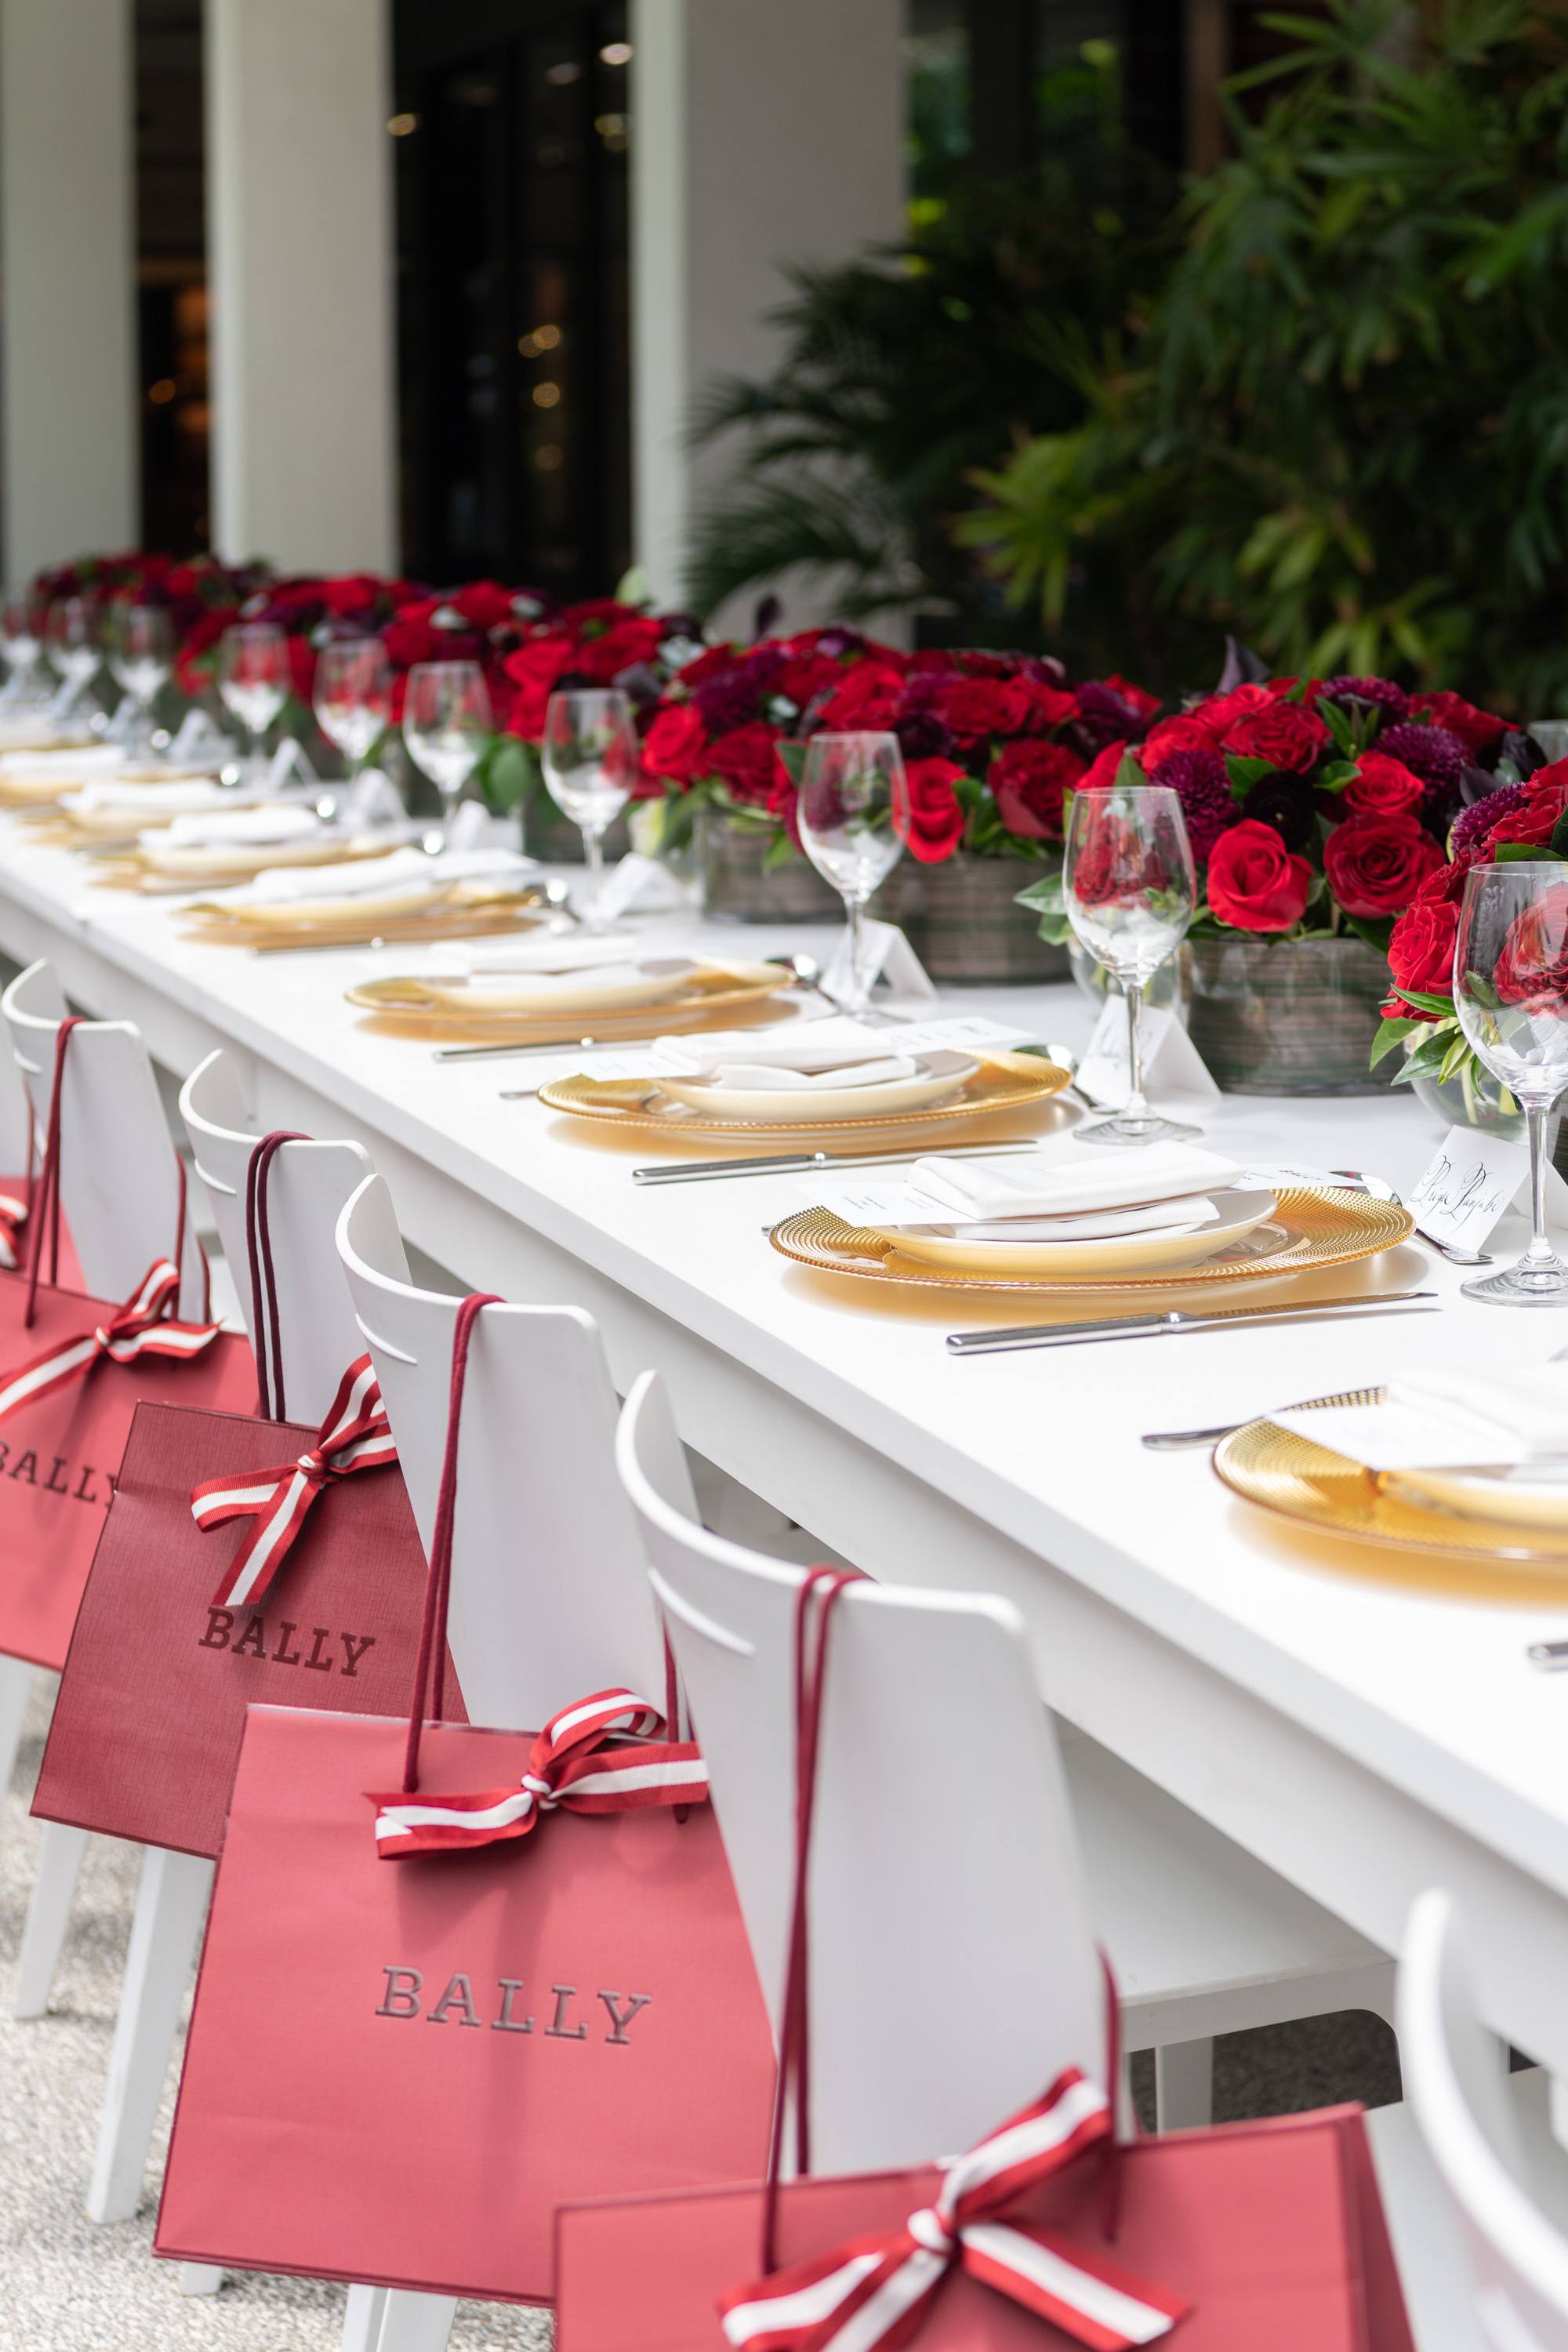 Bally luncheon table adorned with roses and Bally gift bags